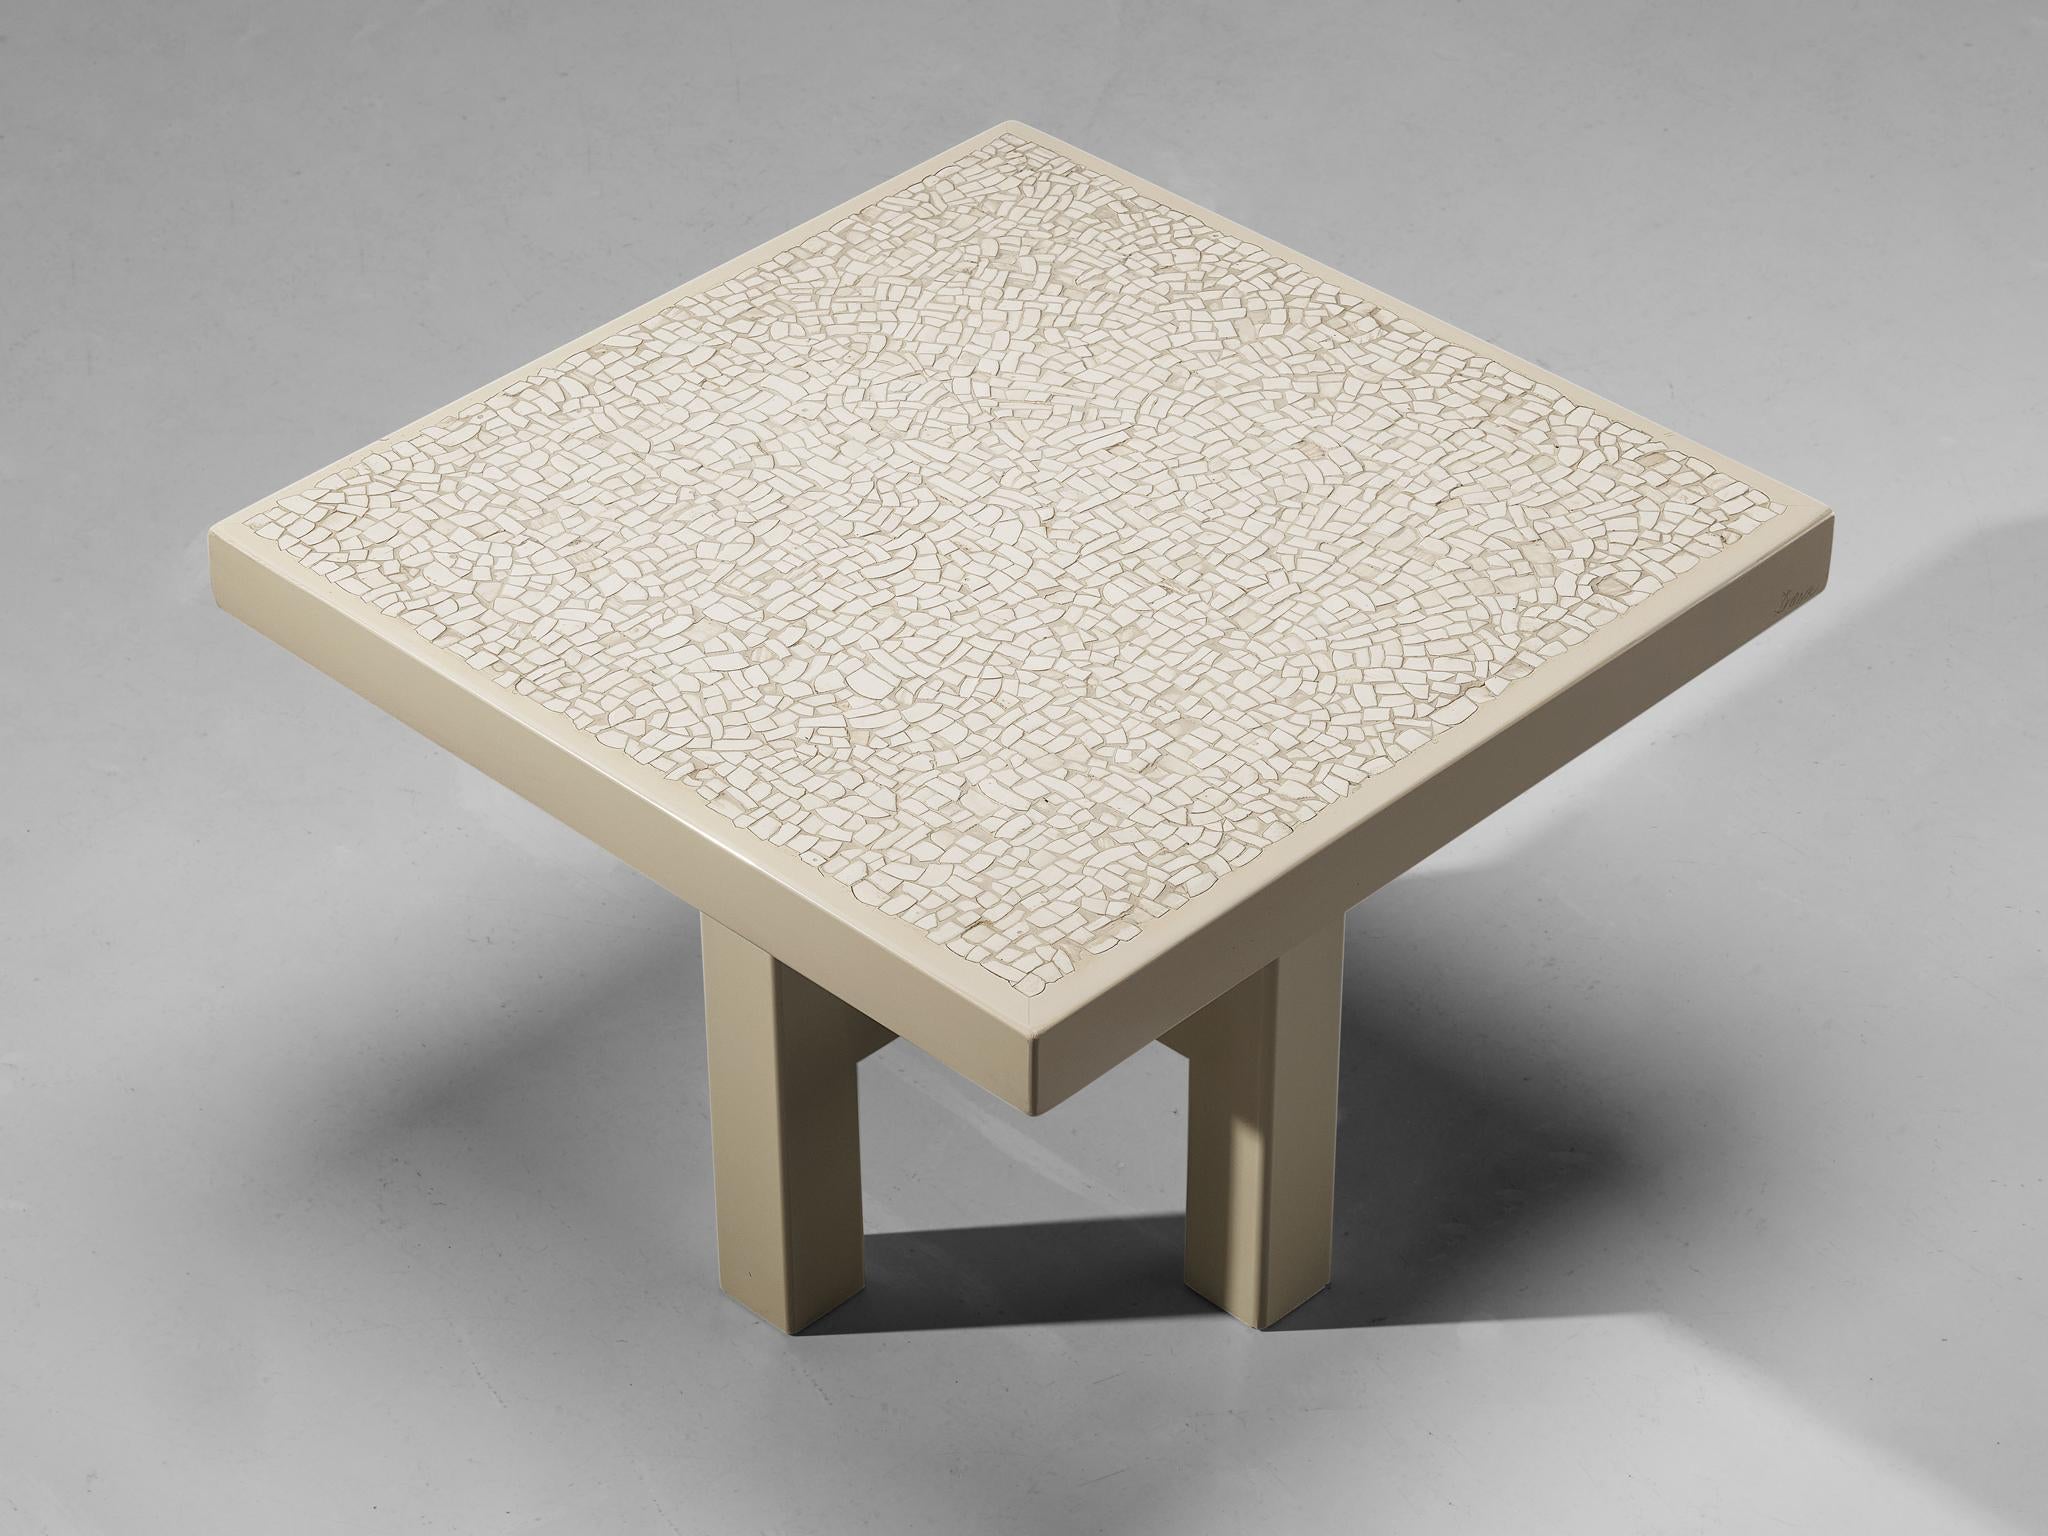 Jean Claude Dresse Unique Coffee Table in Resin with Bone Mosaic Inlay